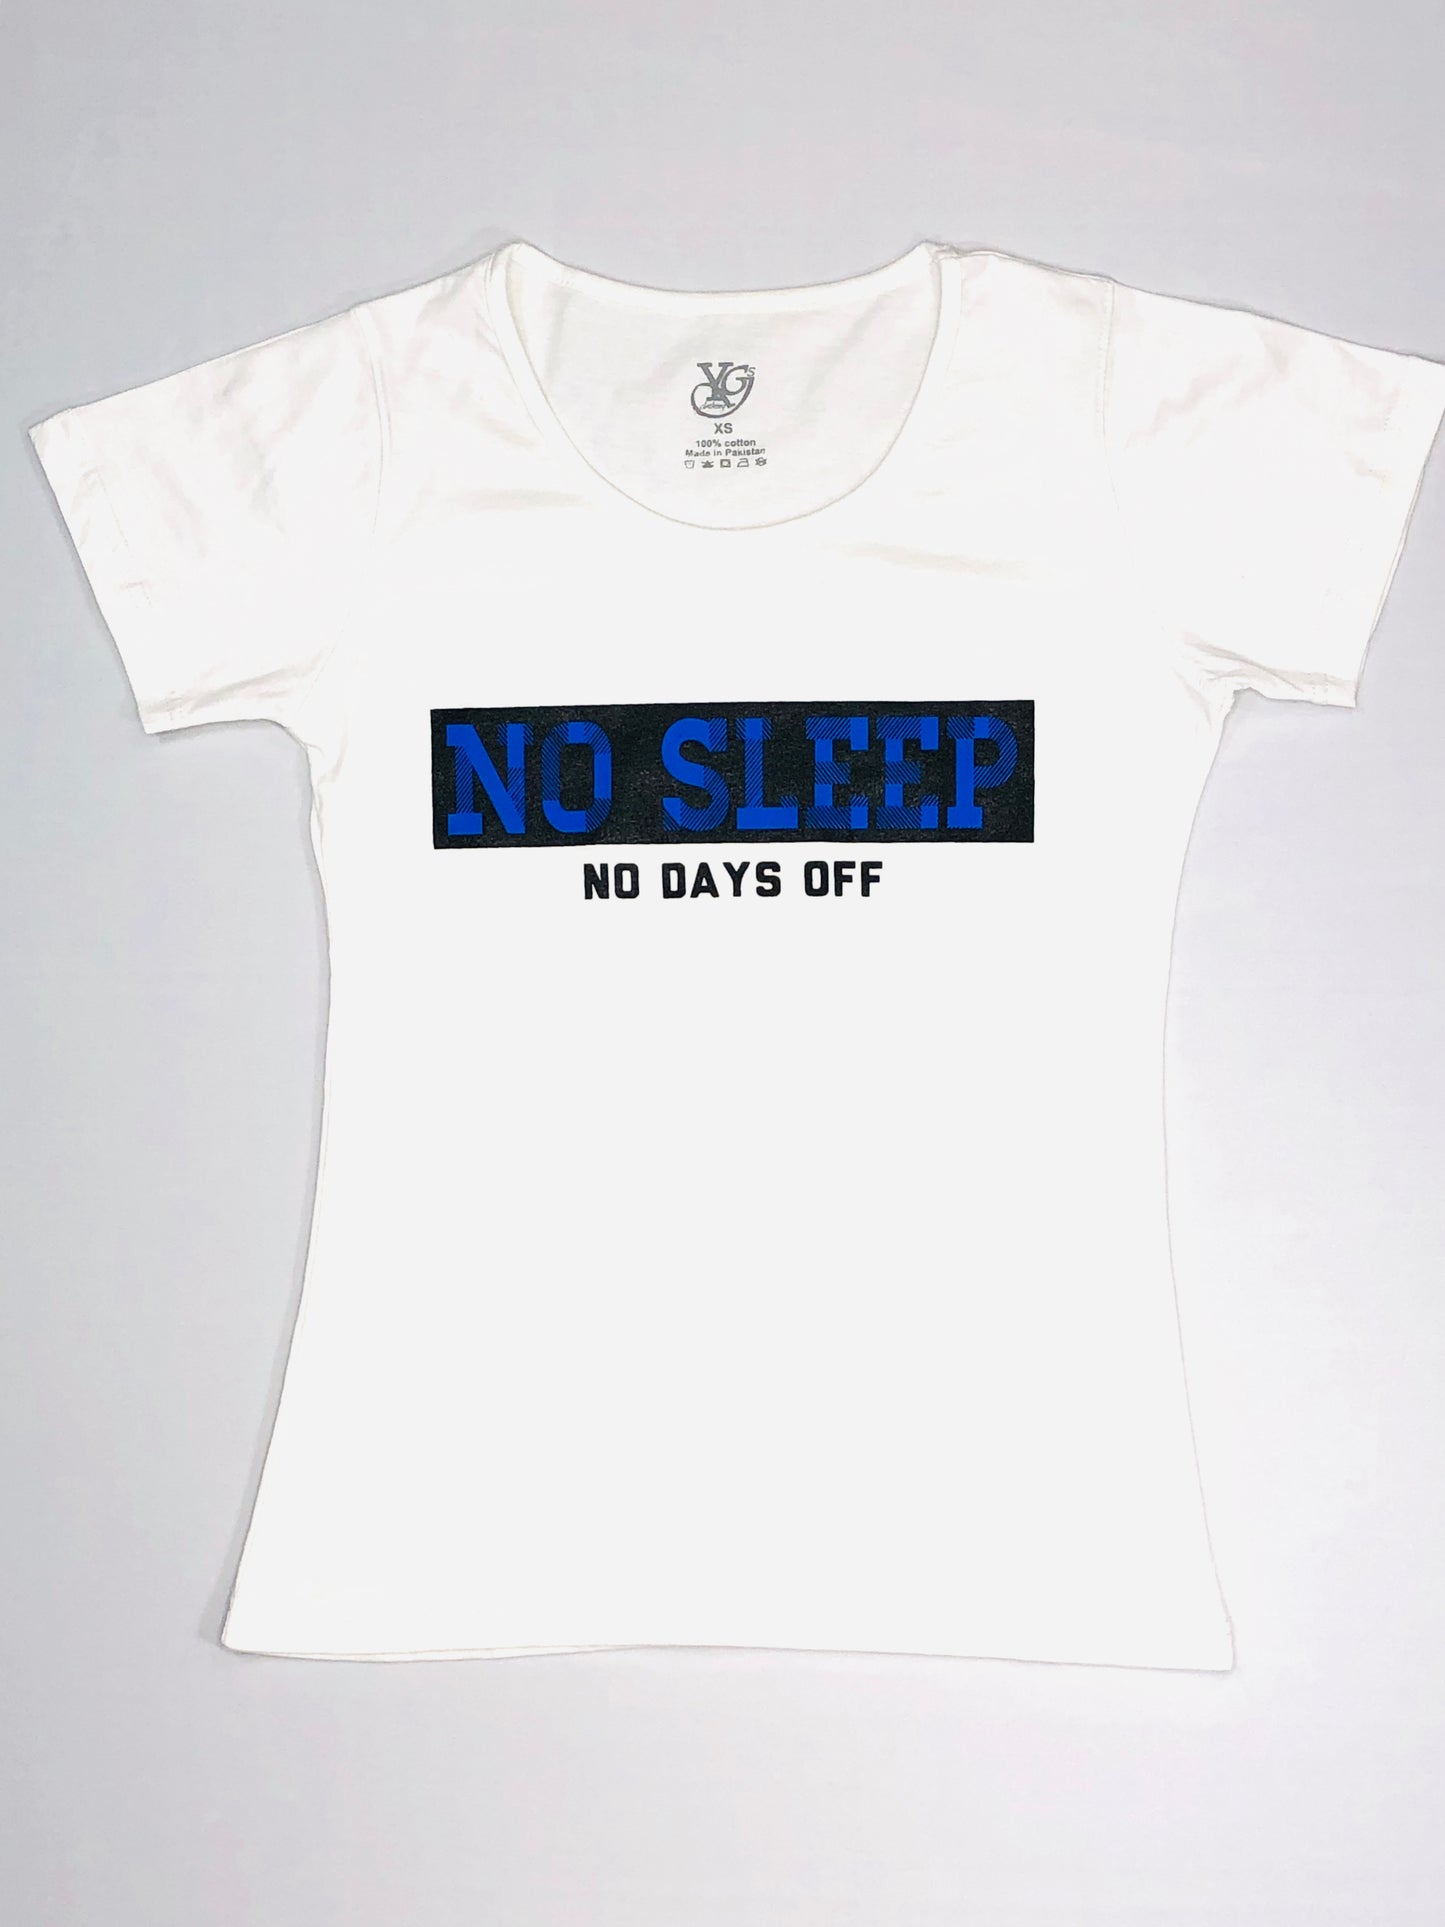 No Sleep No Days Off  Short-Sleeve T-Shirt - Young GS Clothing